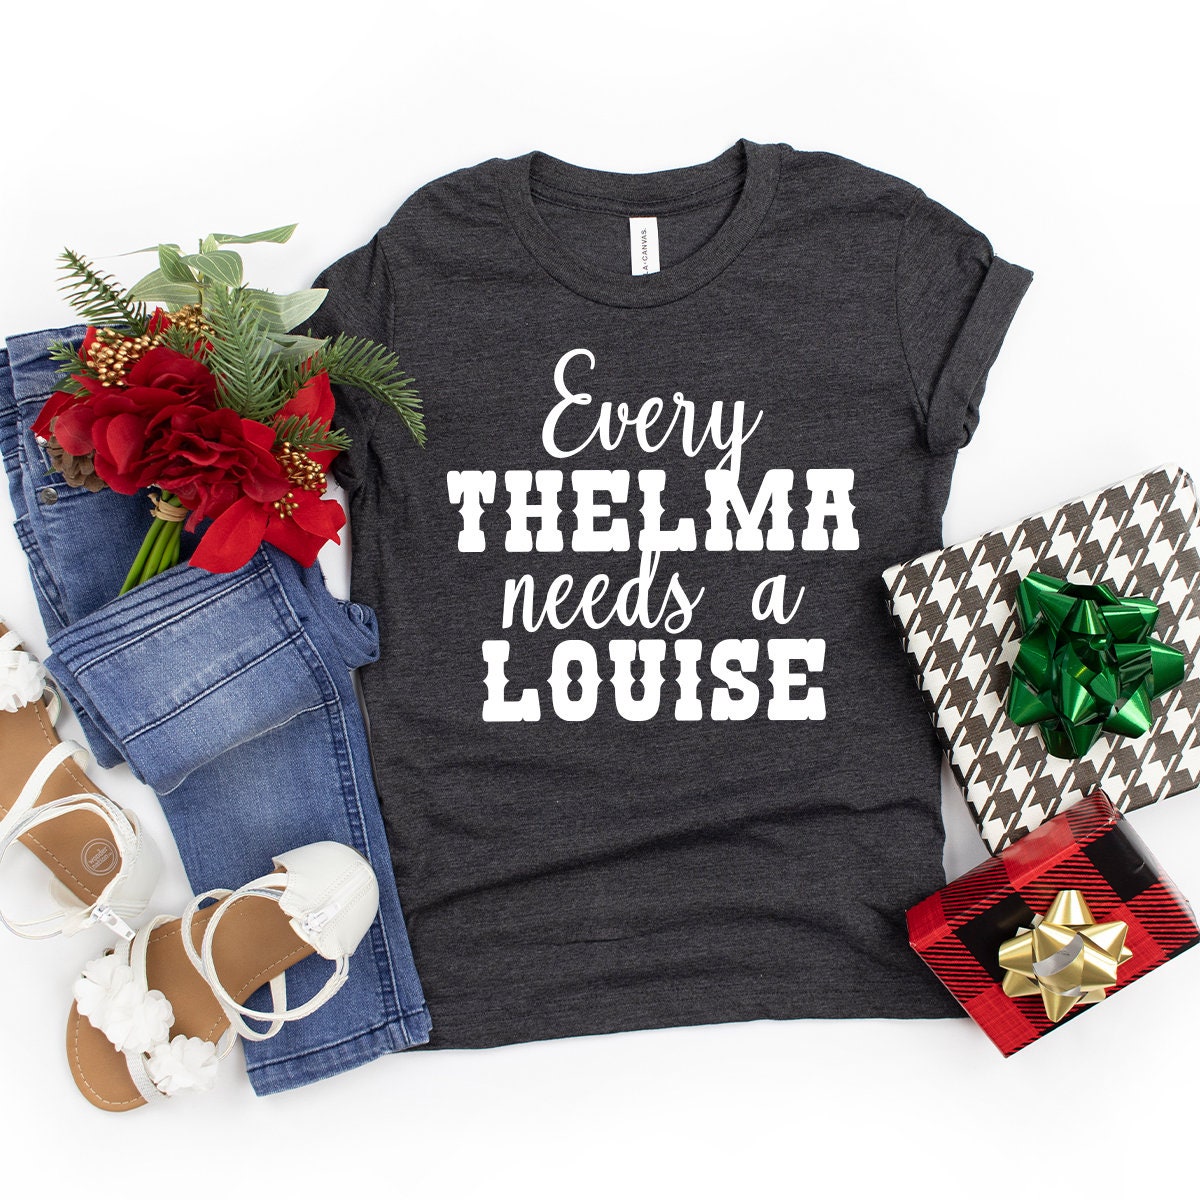 Funny Best Friend Shirt, Thelma and Louise Shirt, Funny T-Shirt, Sarcastic Tee, Funny Women Shirt, Sarcasm Quotes Tee, Funny Saying Shirt - Fastdeliverytees.com